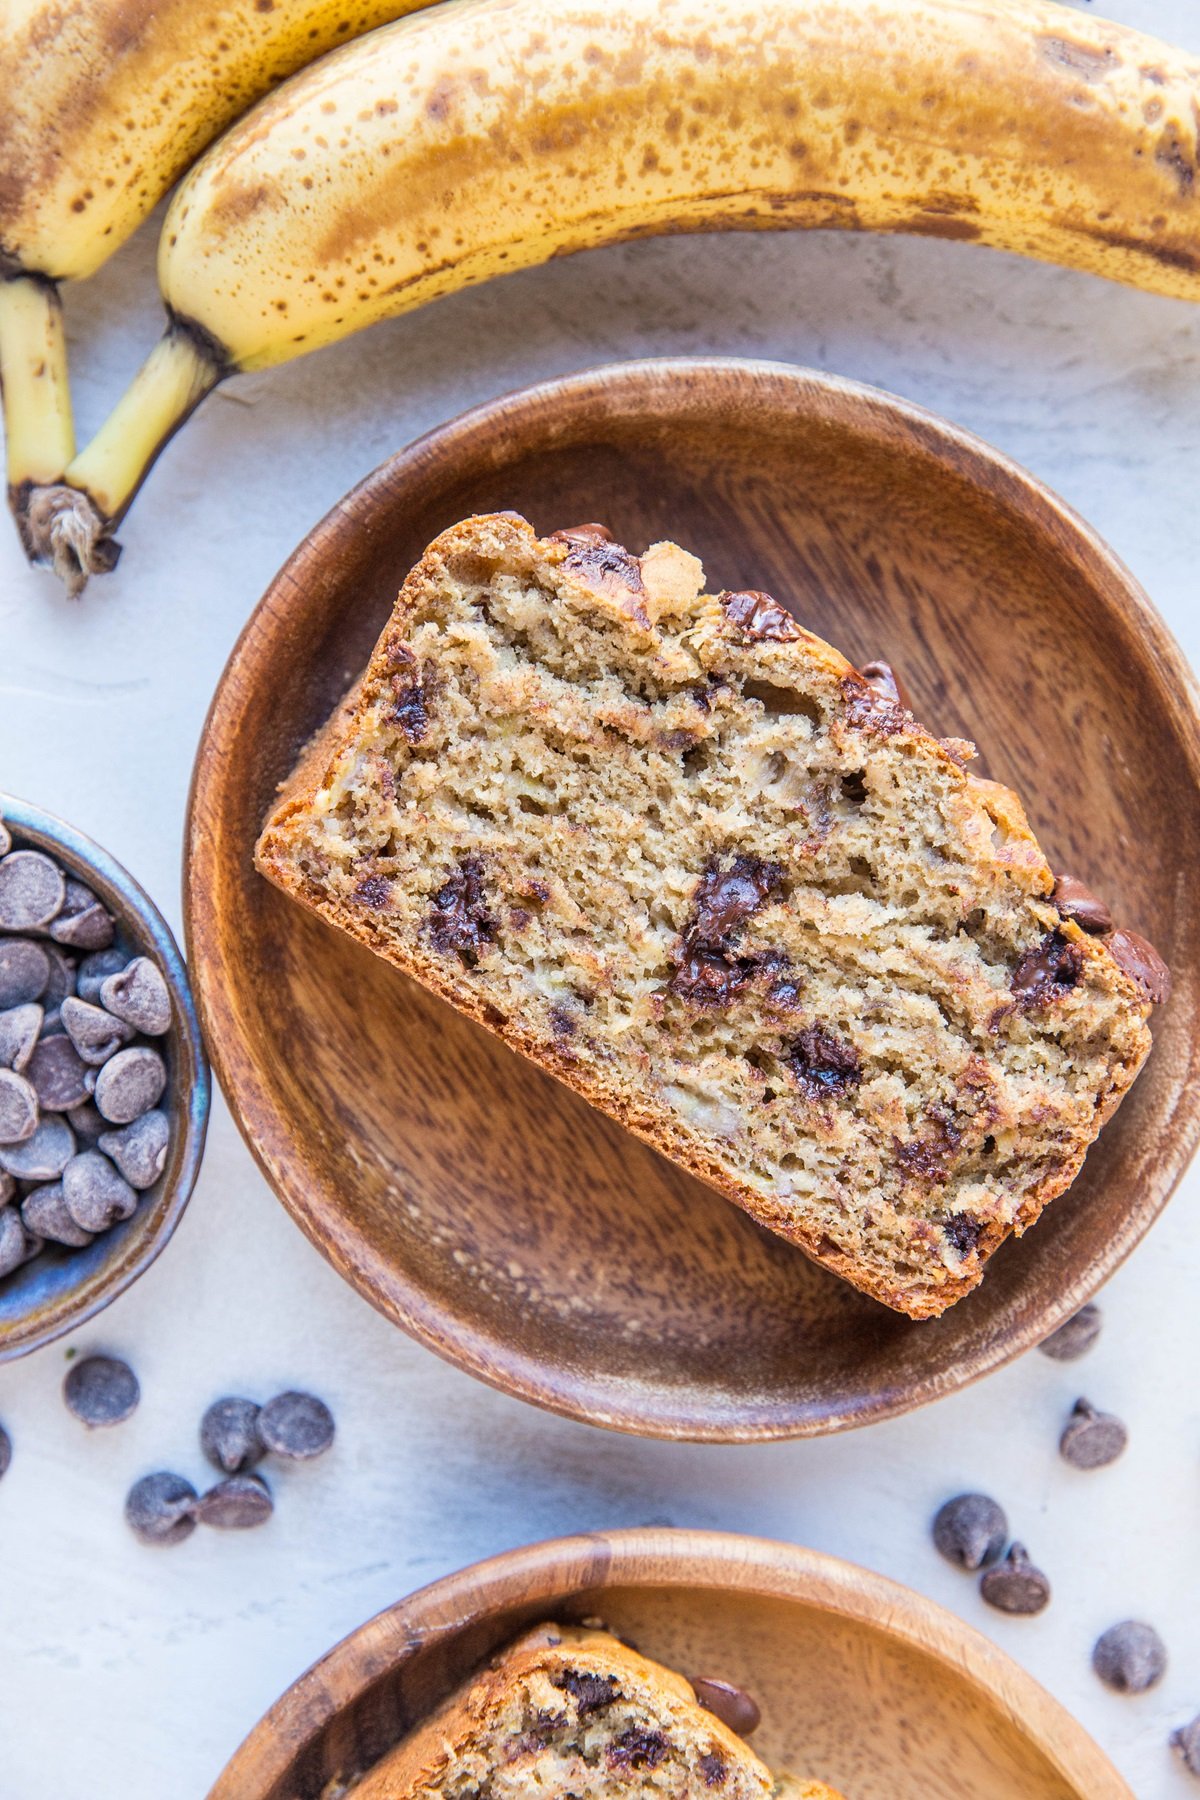 The Best Banana Bread Recipe made with gluten-free flour and sweetened with coconut sugar, studded with chocolate chips